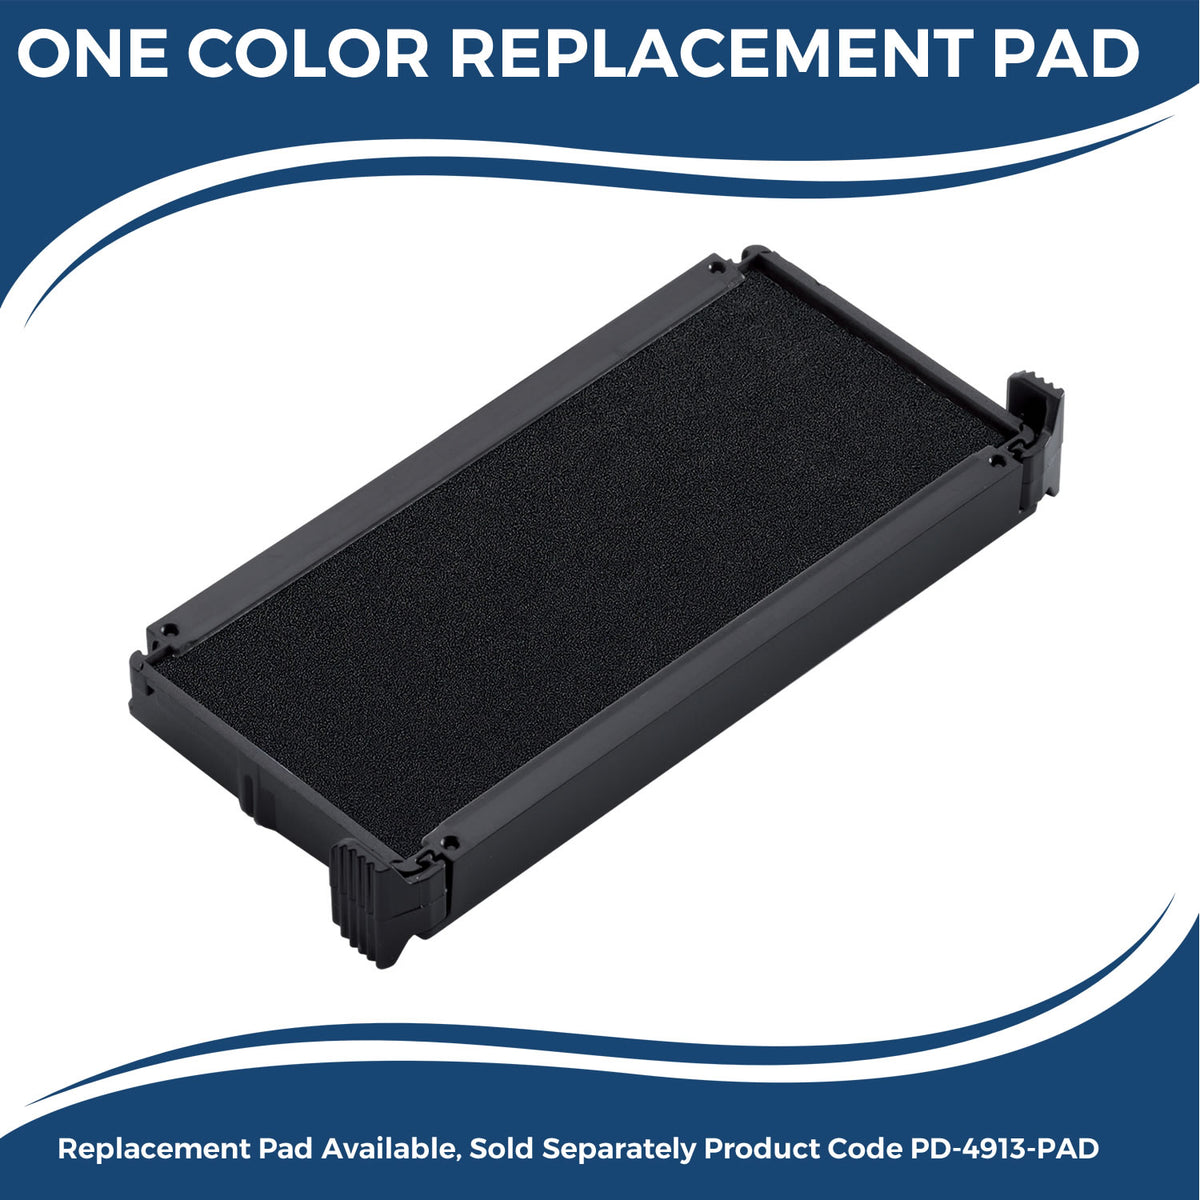 Large Self-Inking Banco Stamp 5557S Large Replacment Pad